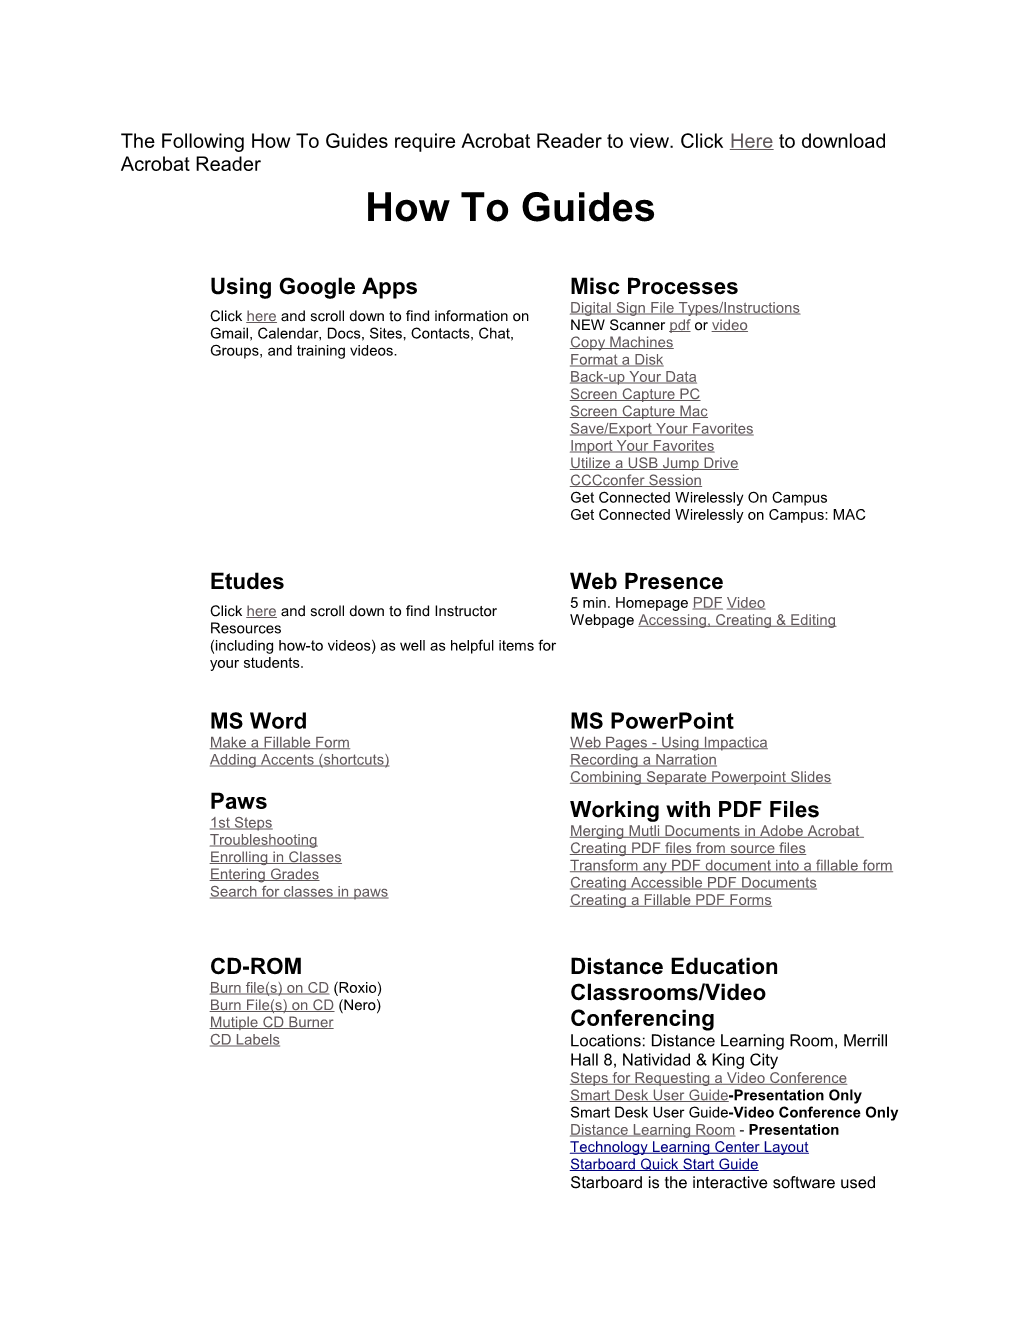 The Following How to Guides Require Acrobat Reader to View. Clickhereto Download Acrobat Reader